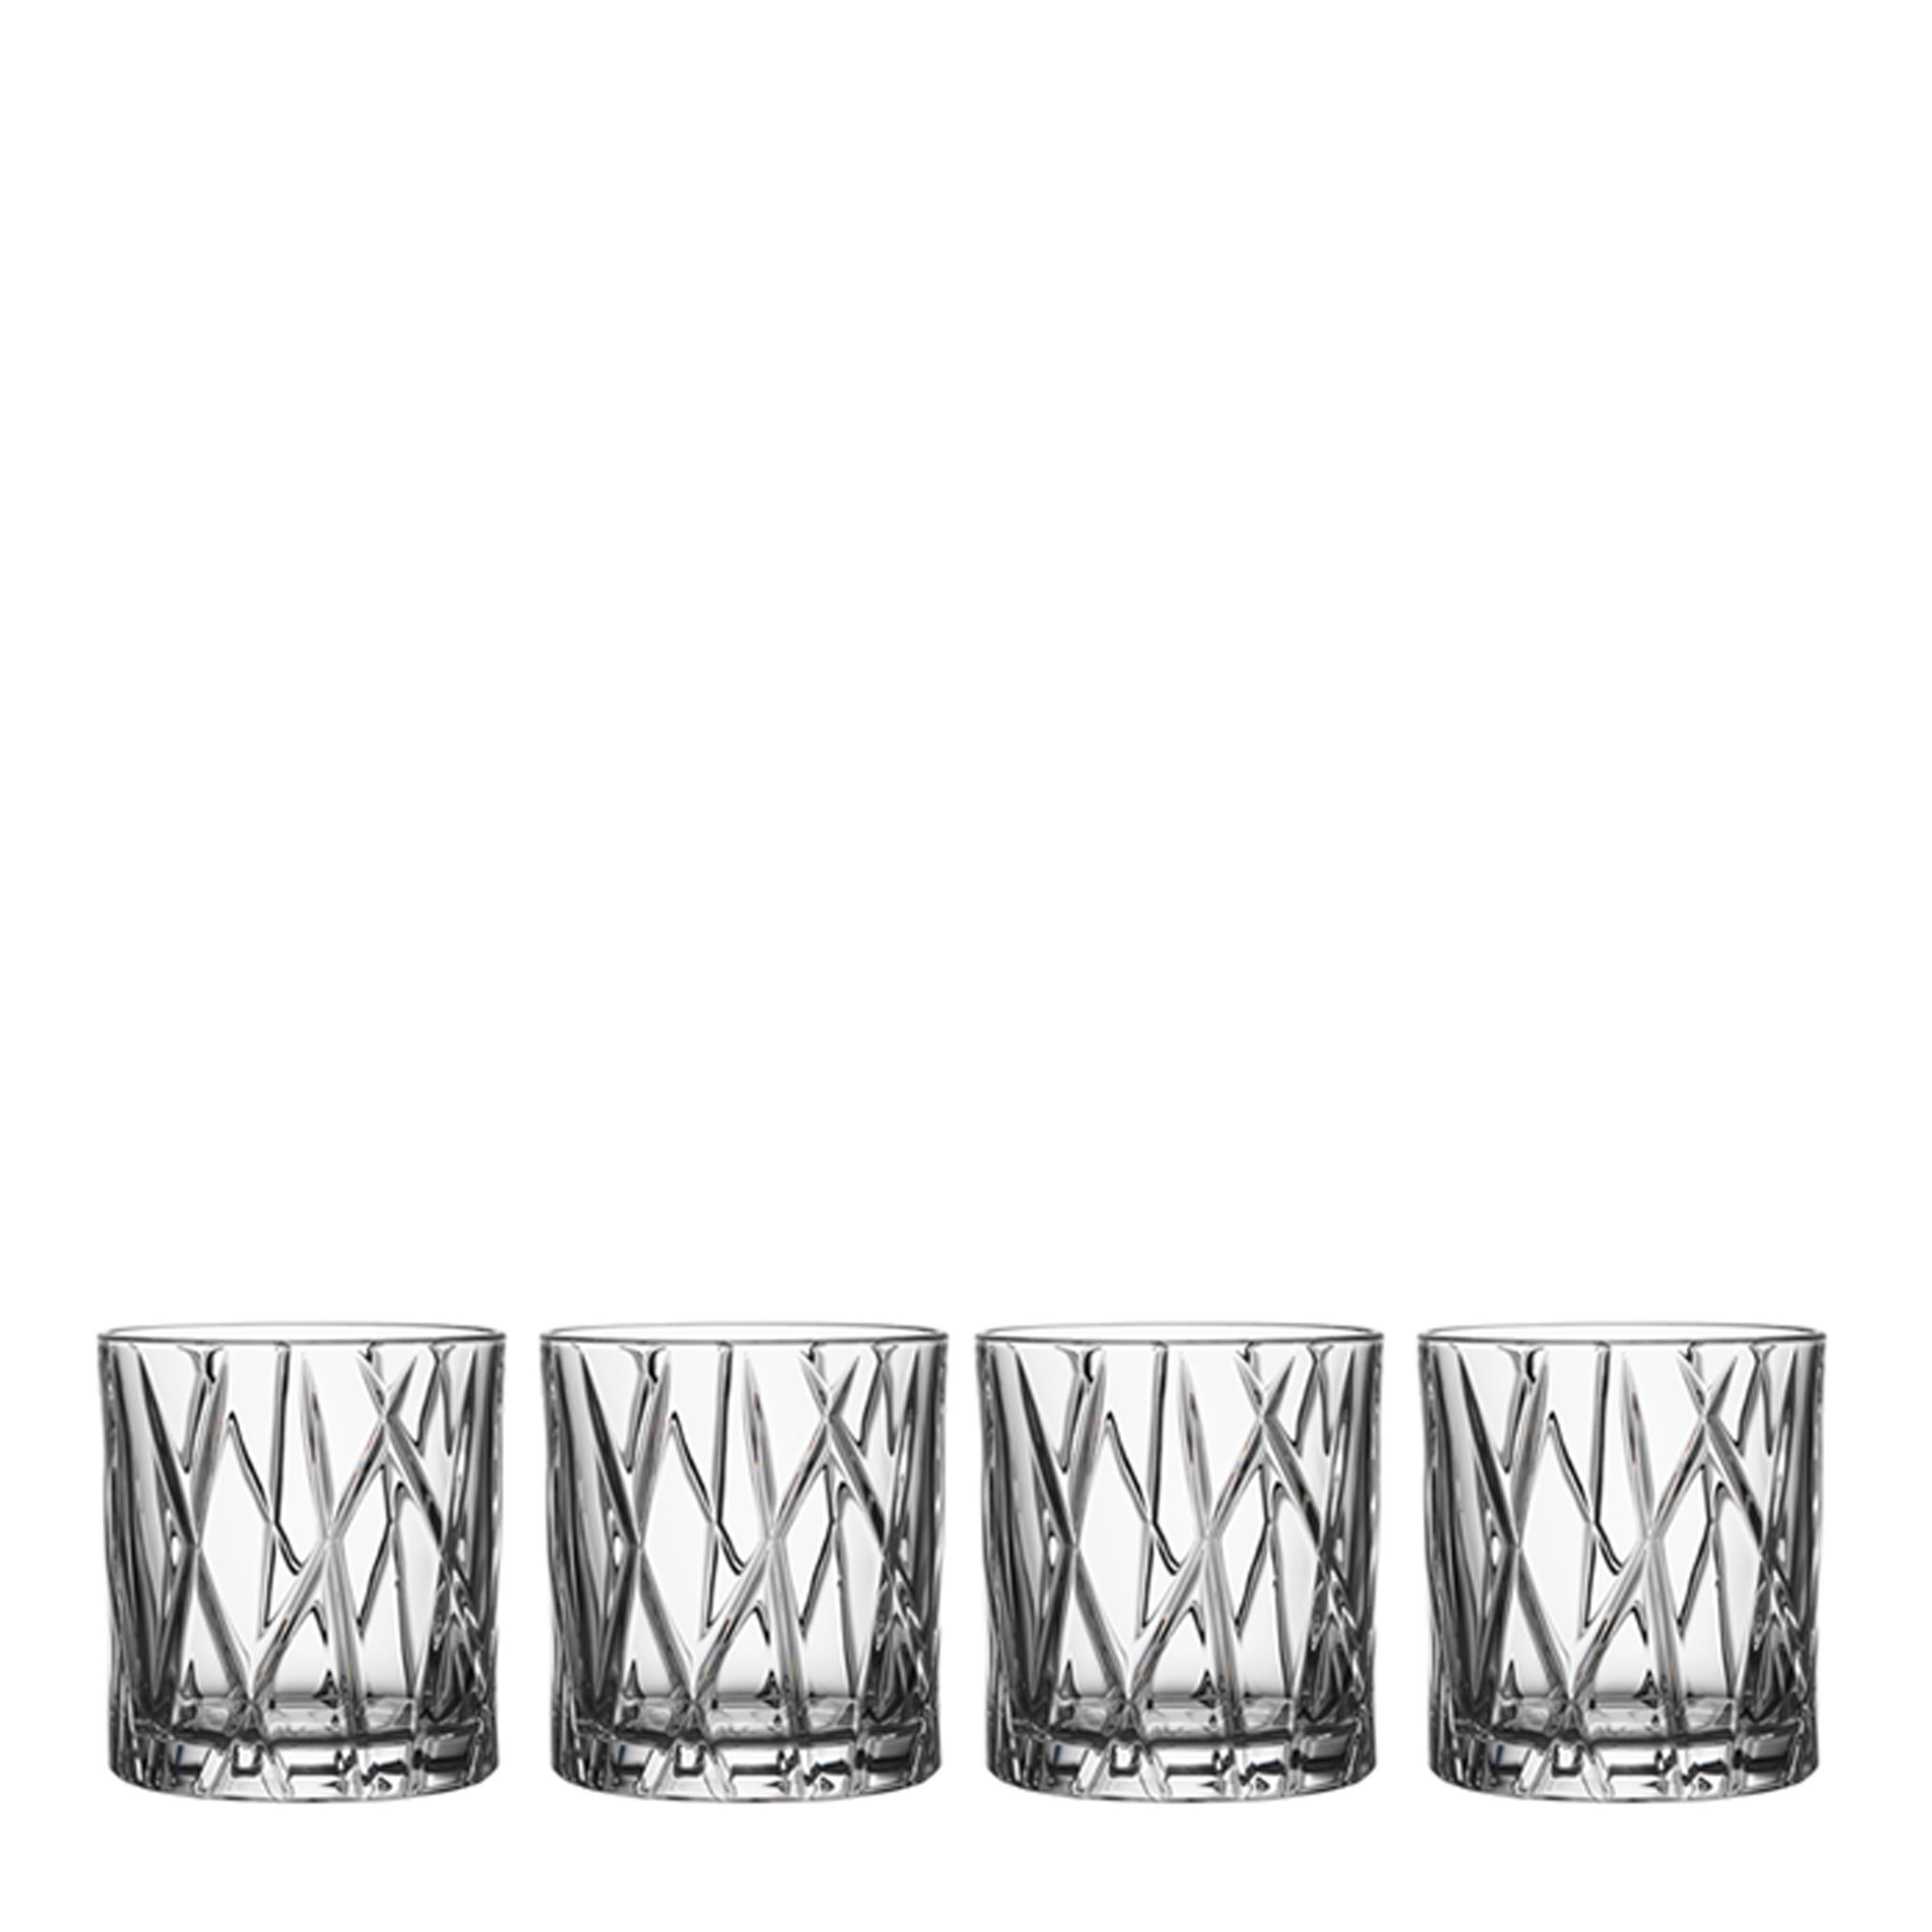 City Old Fashioned from Orrefors holds 8 oz and is ideal for serving spirits and cocktails. The cuts that criss-cross the surface of the glass create an asymmetric look, which contributes to the distinct identity of the collection. Designed by